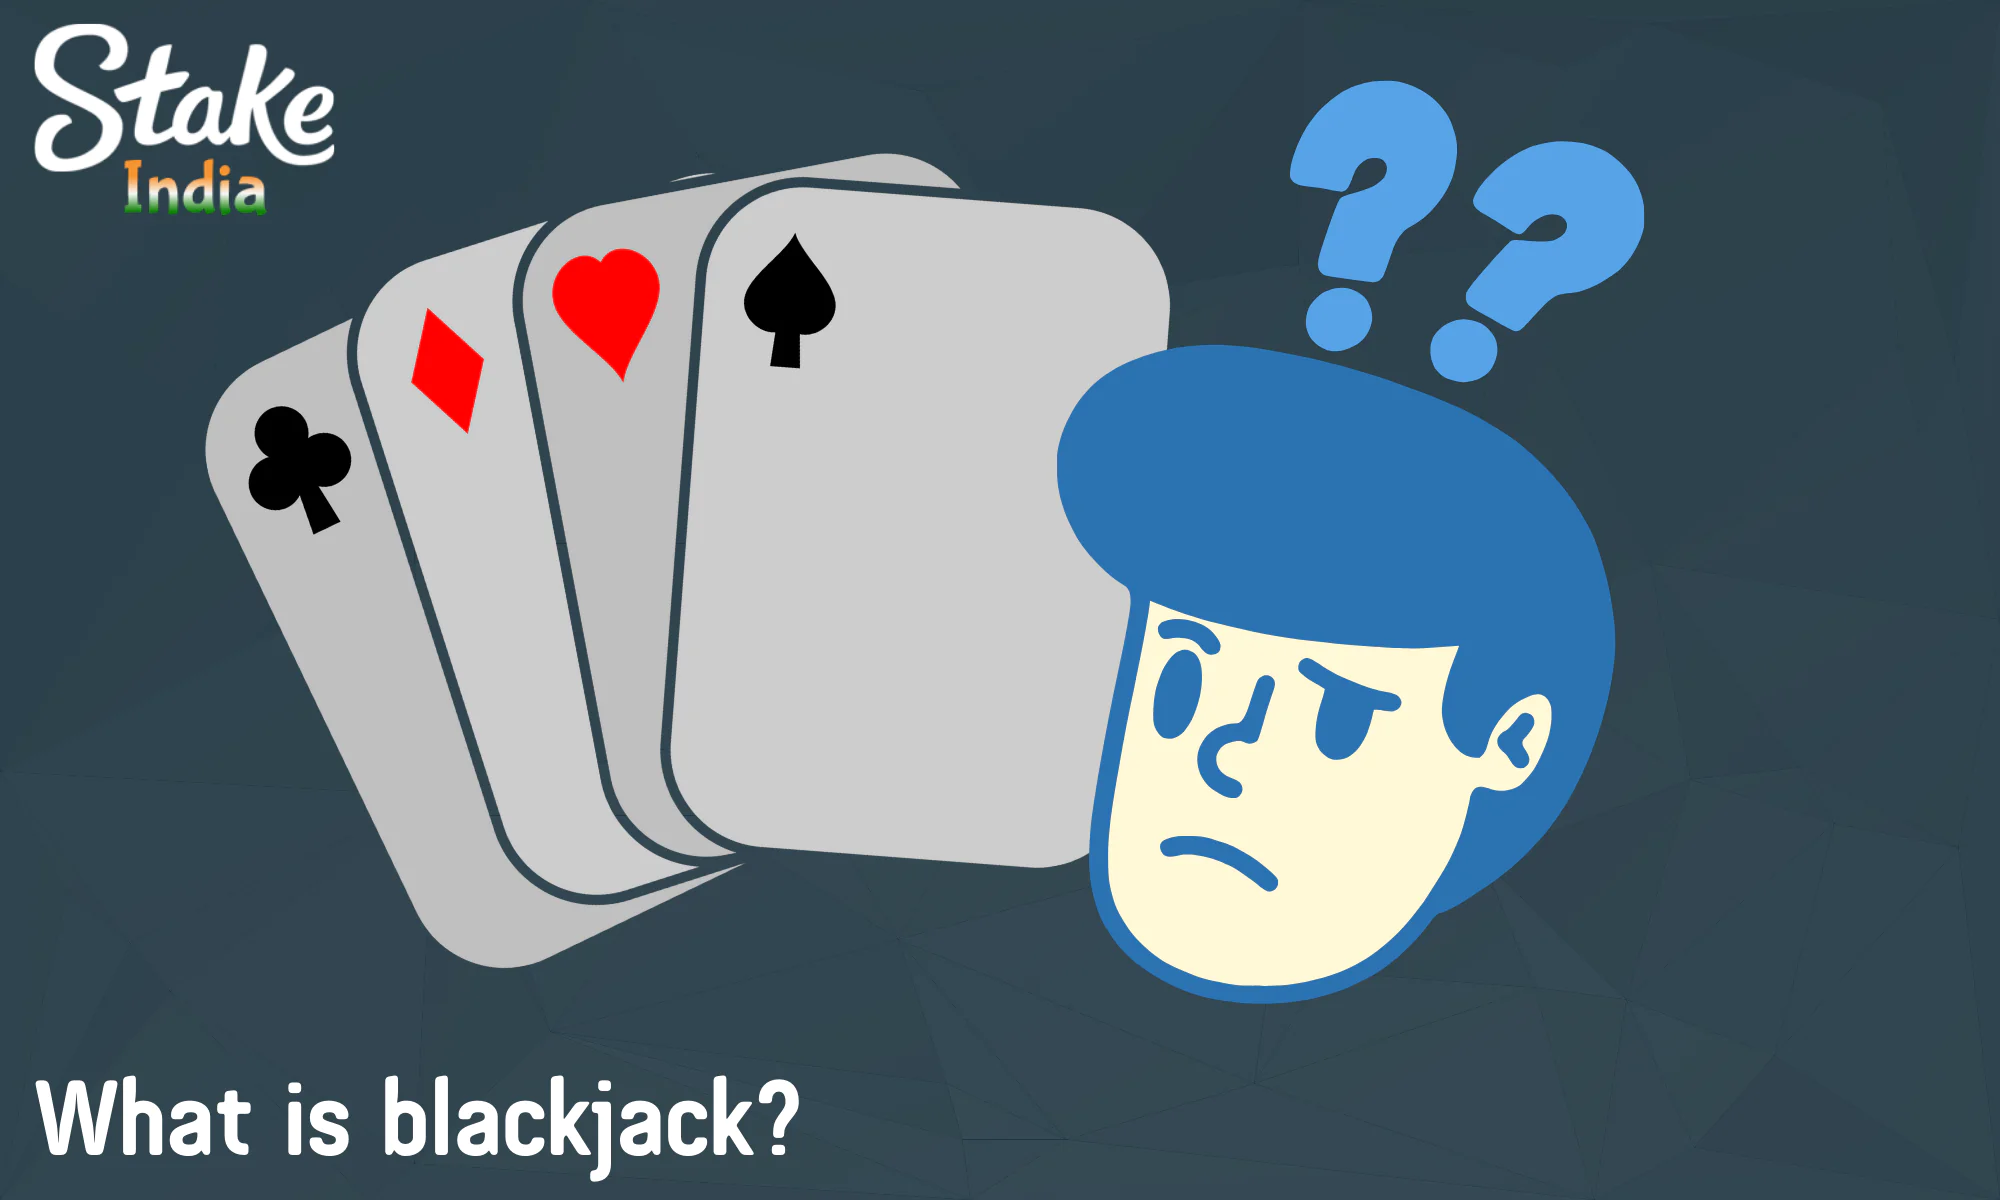 Learn more about Blackjack at Stake casino